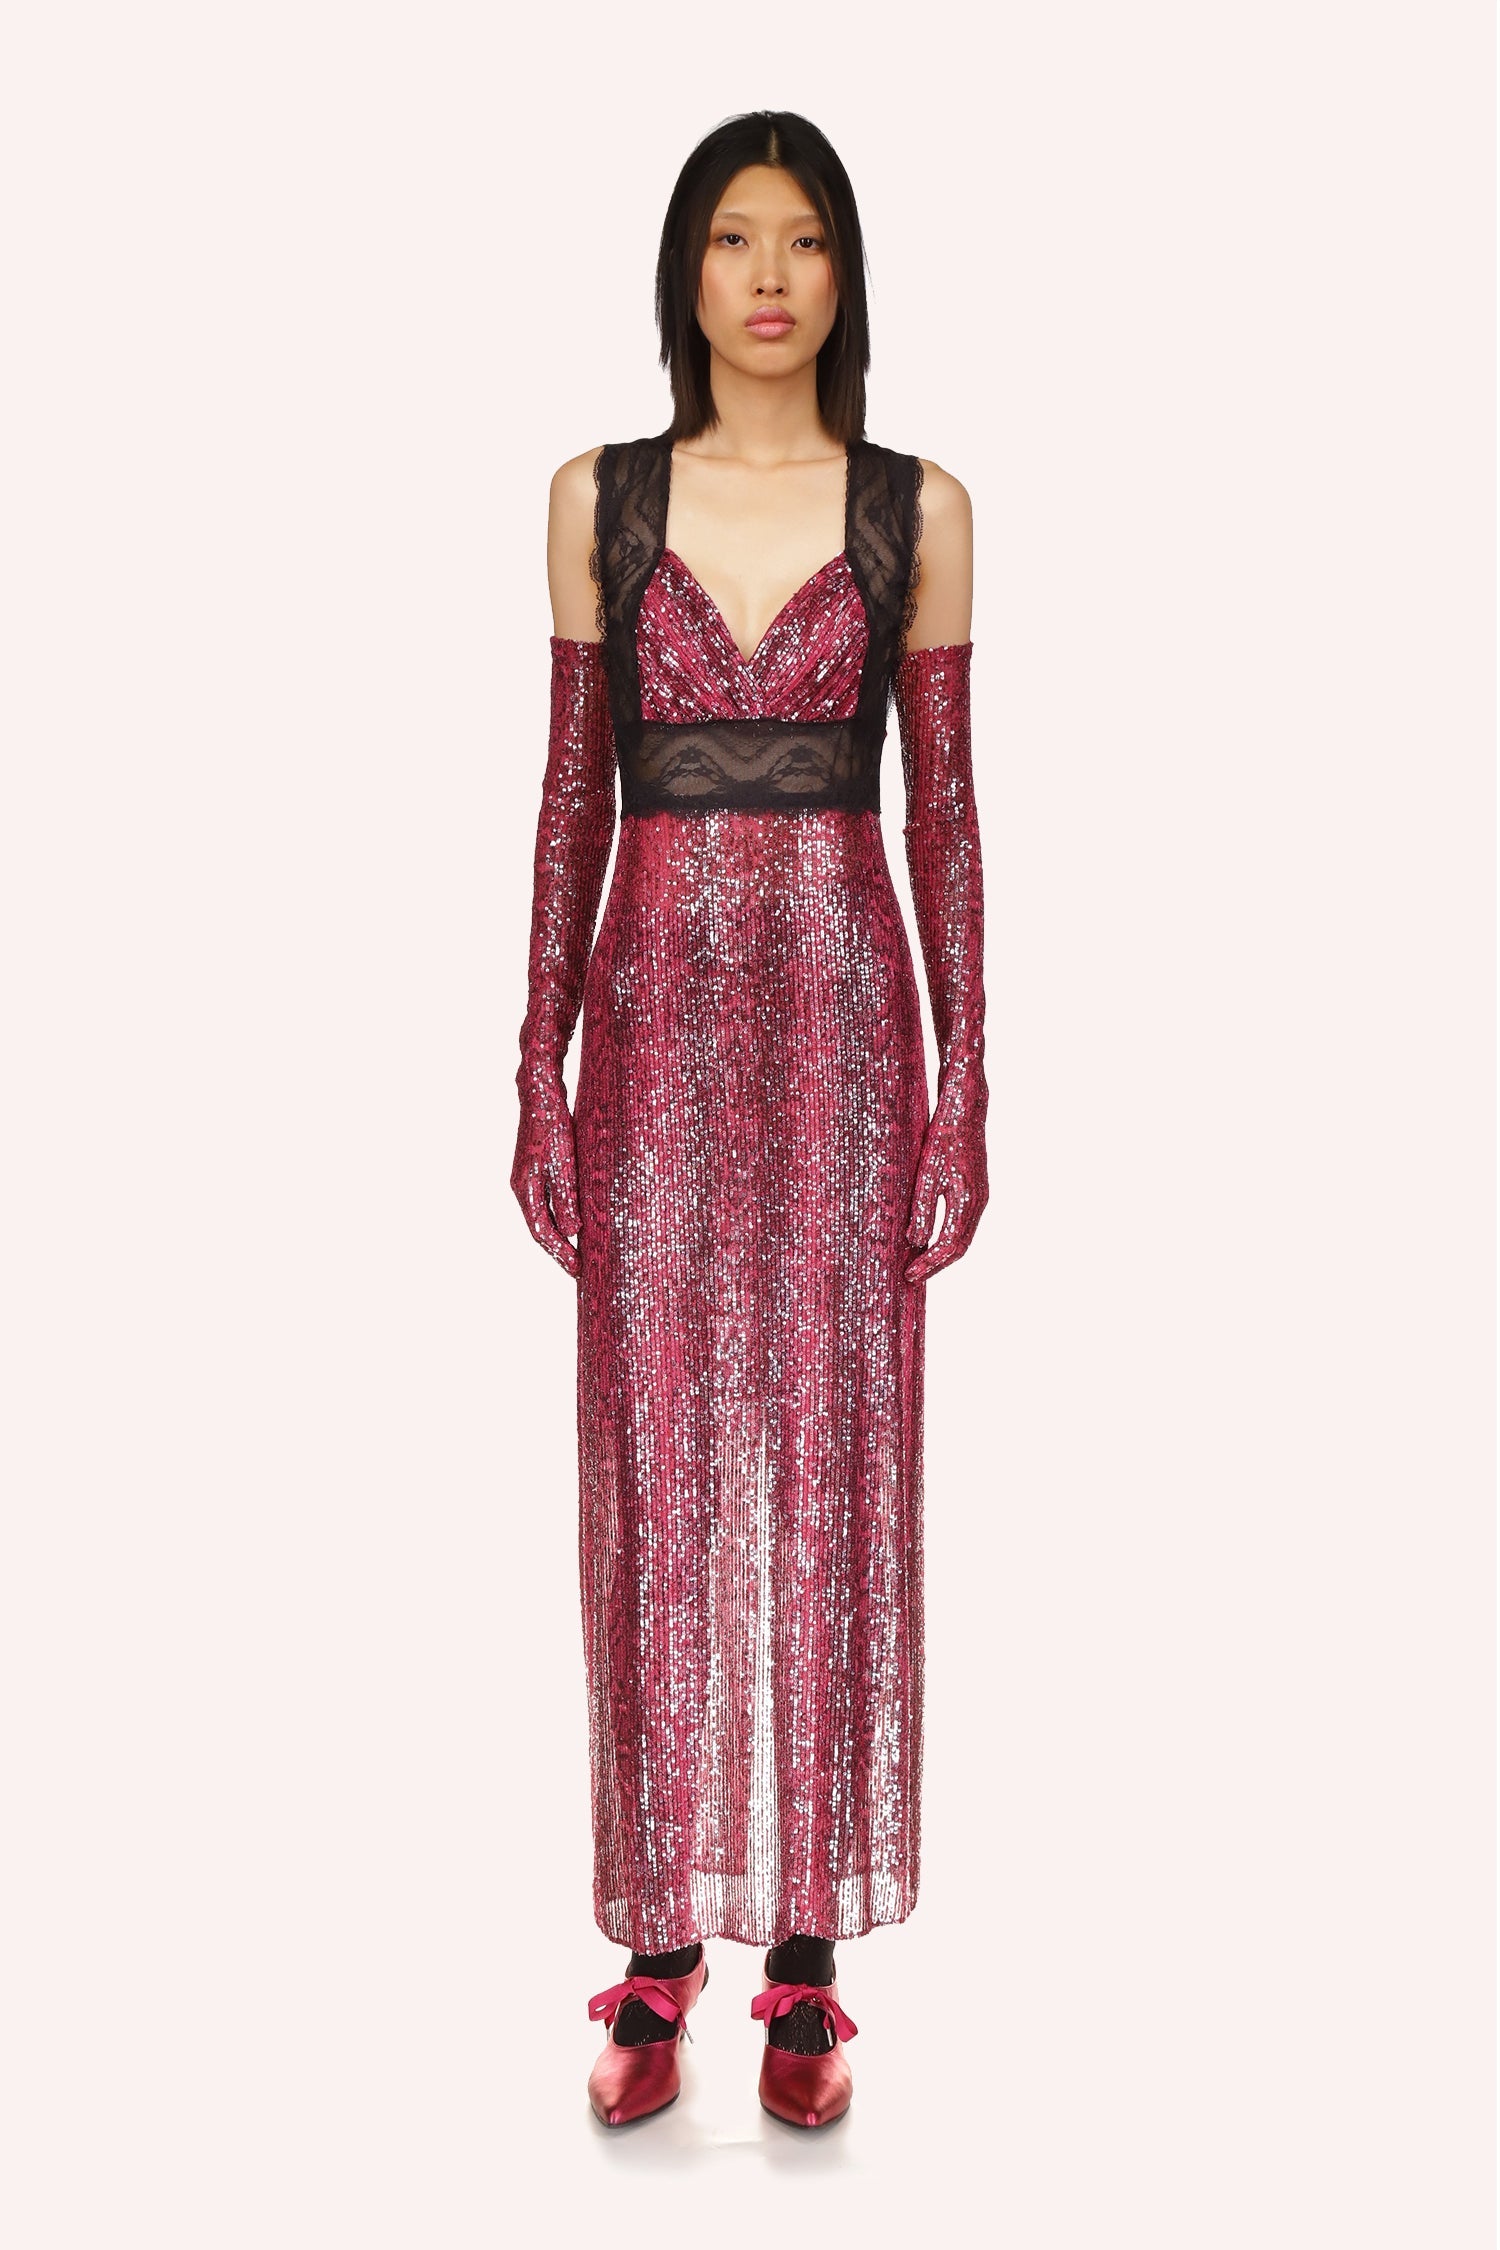 Anna Sui's Red Snakeskin Dress is a long V-neck cut dress with black lace under the bust and over the shoulder